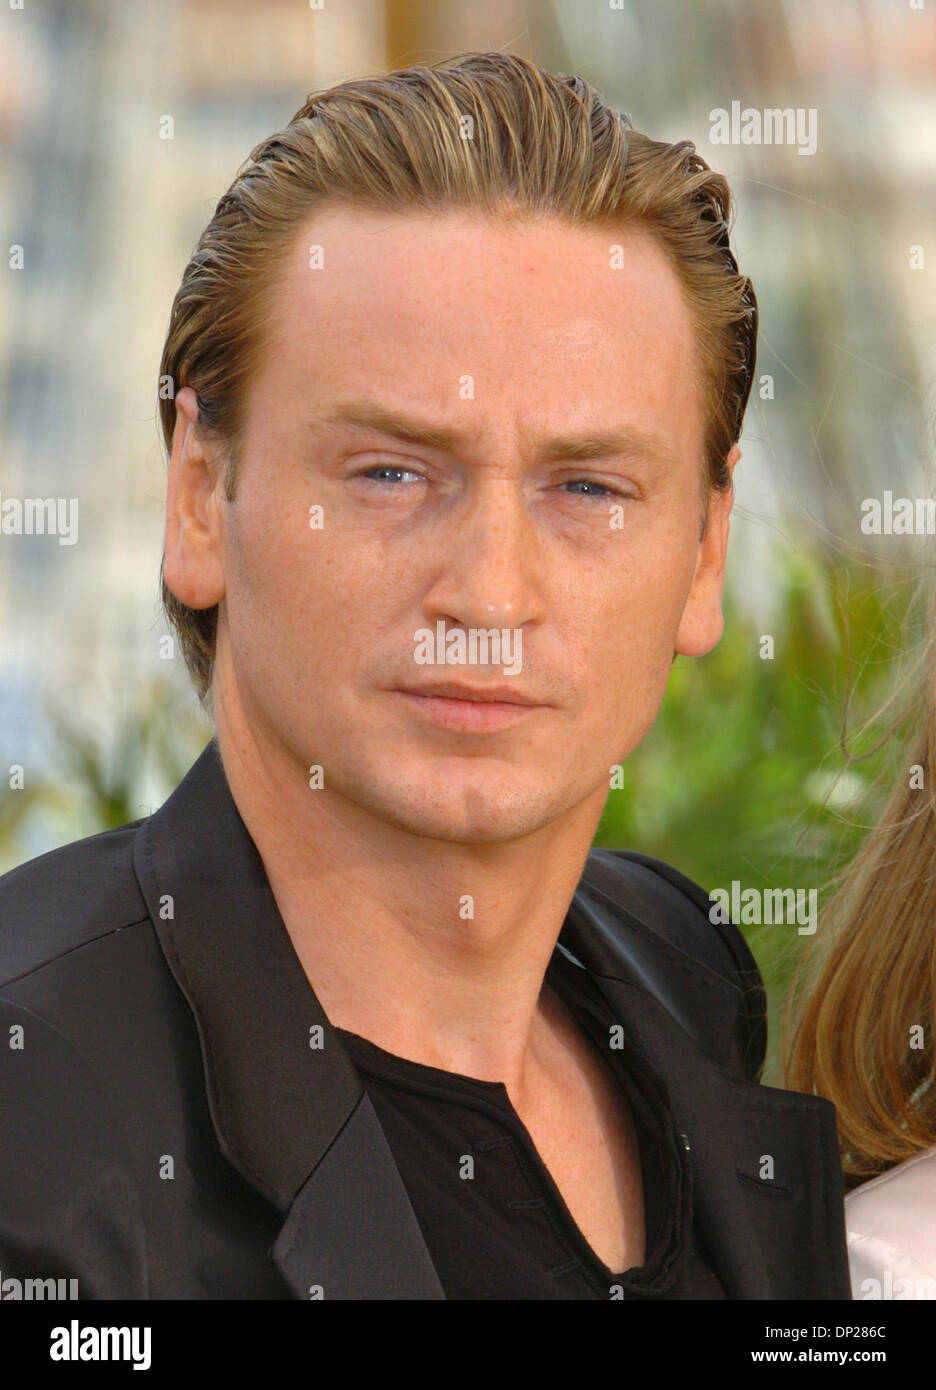 May 20, 2006; Cannes, FRANCE; BENOIT MAGIMEL at the 'Selon Charlie' Photocall during the 59th Cannes International Film Festival.  Mandatory Credit: Photo by Frederic Injimbert/ZUMA Press. (©) Copyright 2006 by Frederic Injimbert Stock Photo